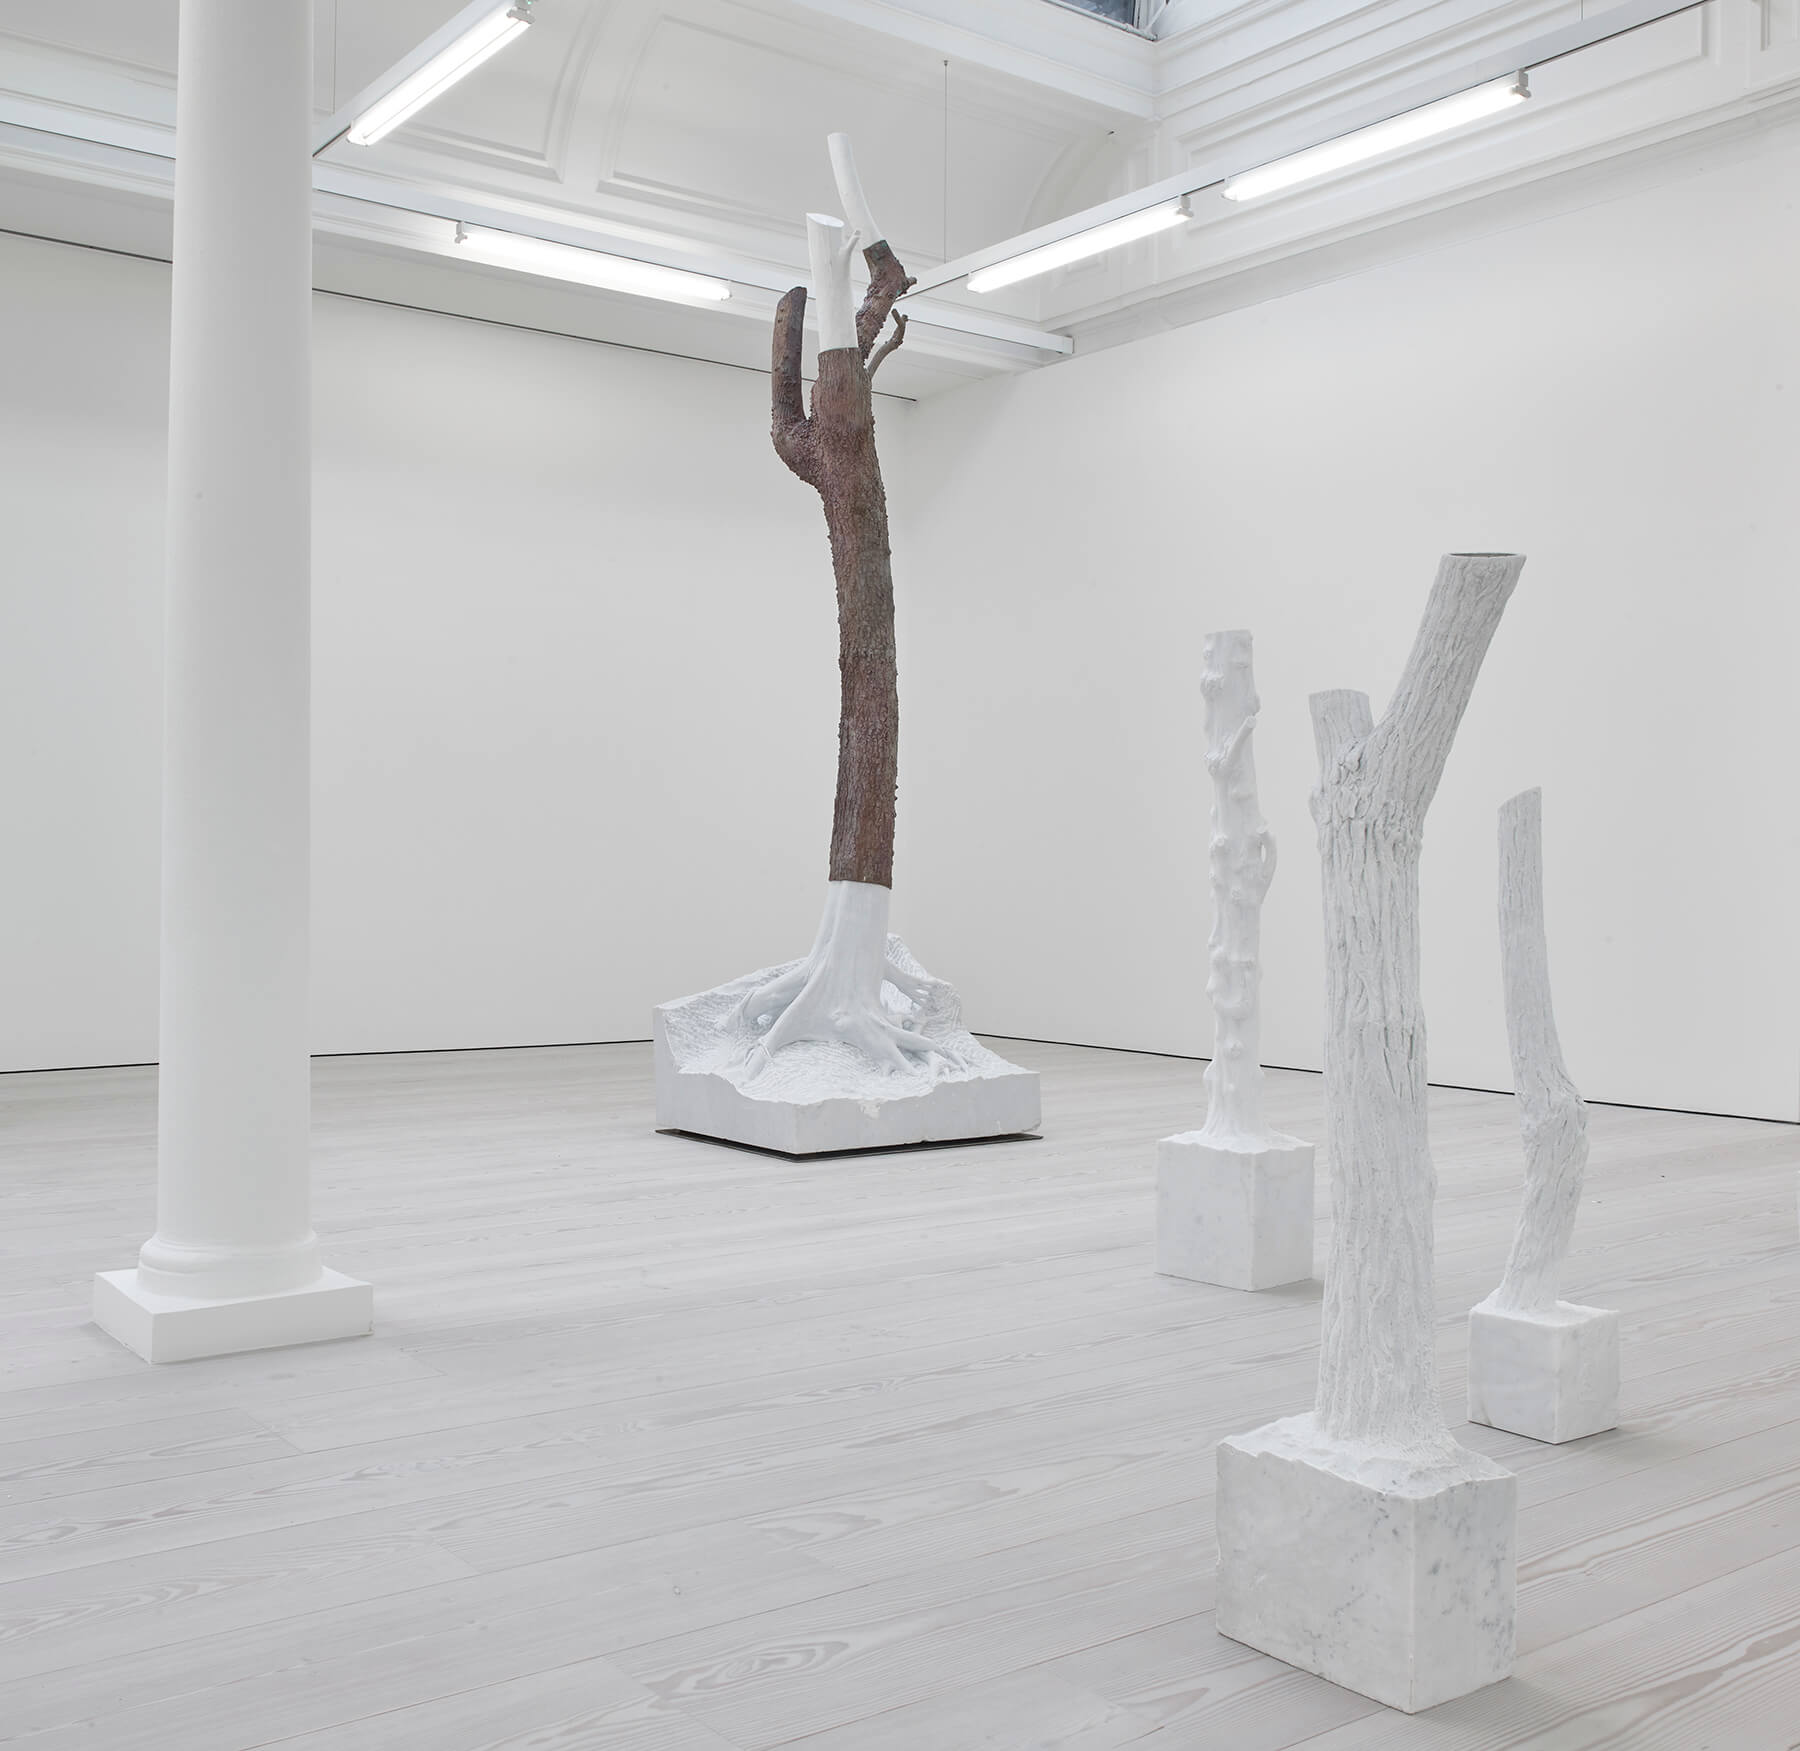 Giuseppe Penone, Fui, Sarò, Non sono (I was, I will be, I am not) Installation view at Marian Goodman Gallery London